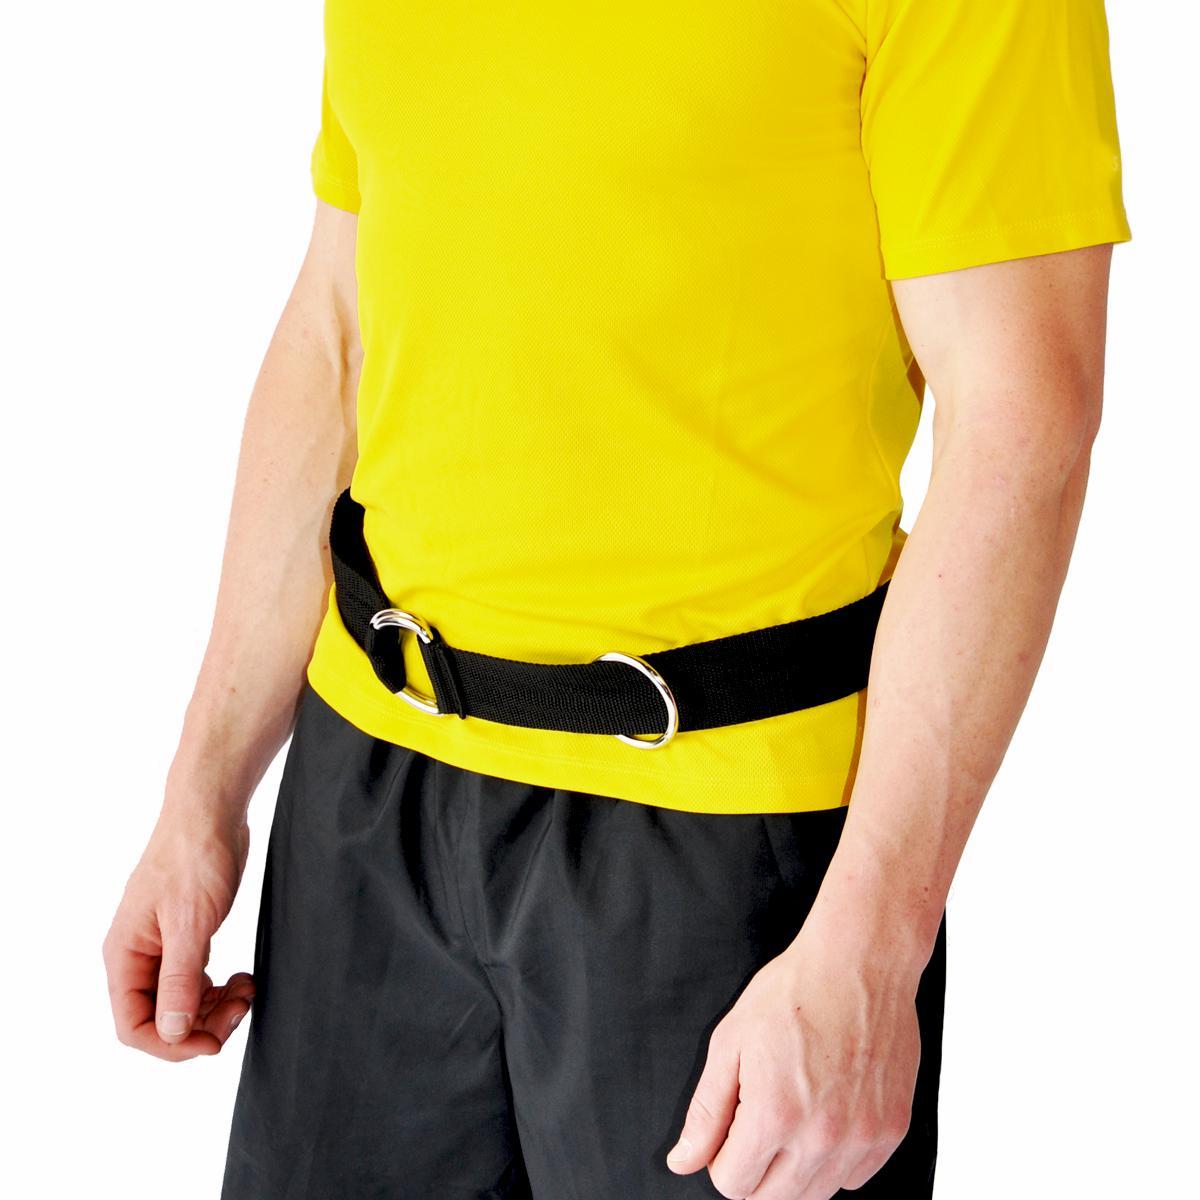 Basic Athletic trainer belt. adjustable, webbing belt with ring for coaches, teams, organizations and trainers